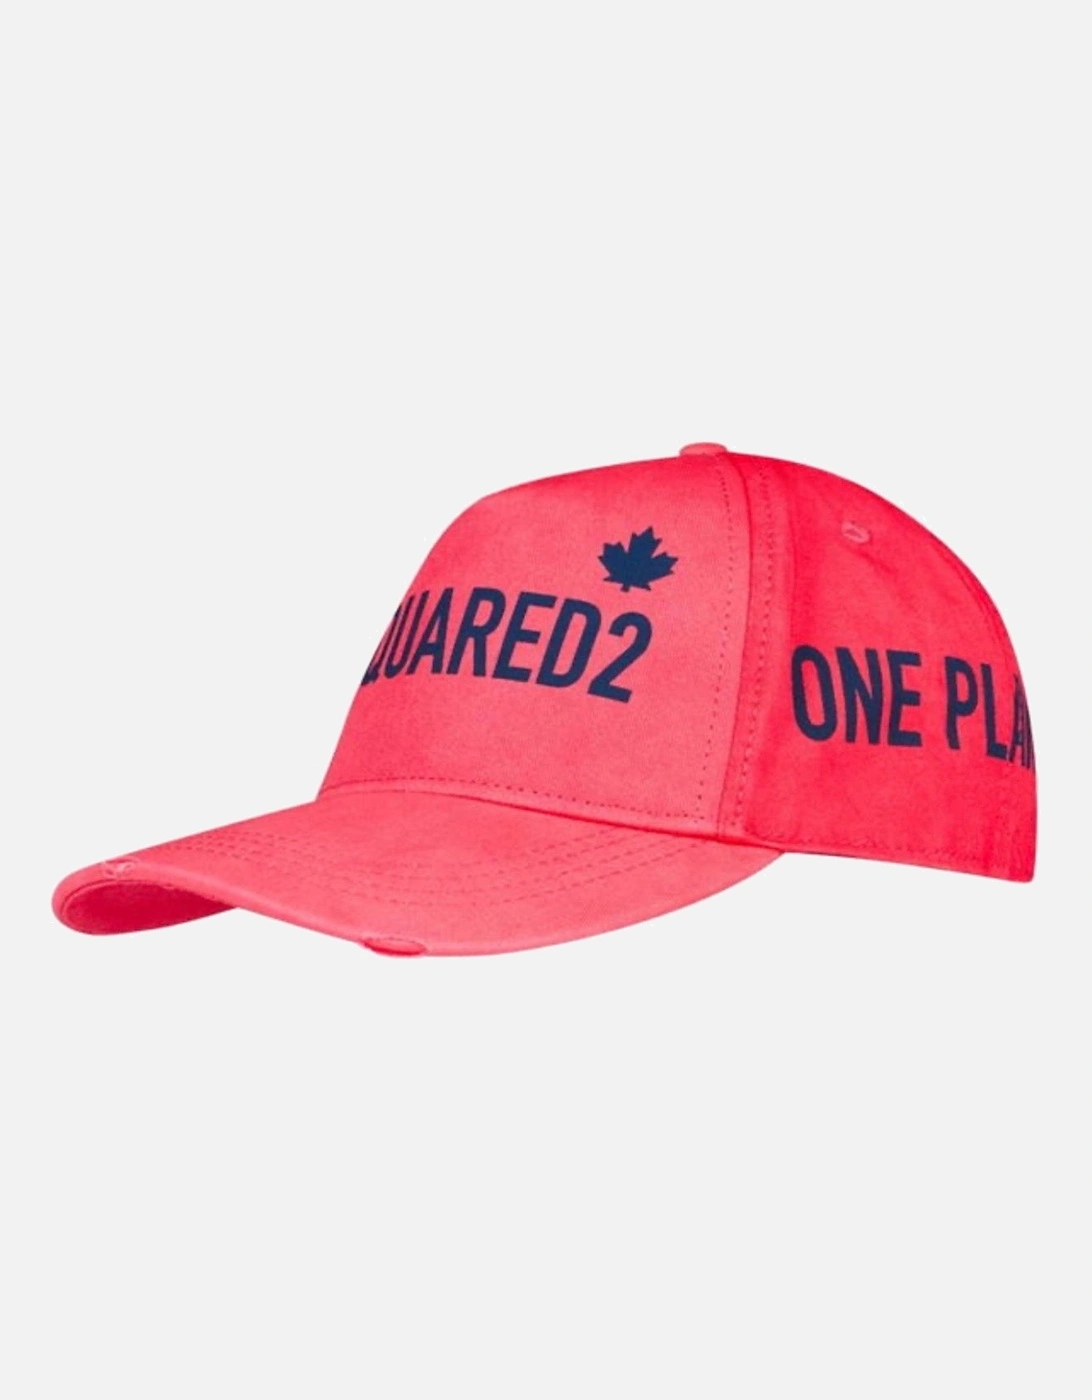 One Planet Logo Red Cap